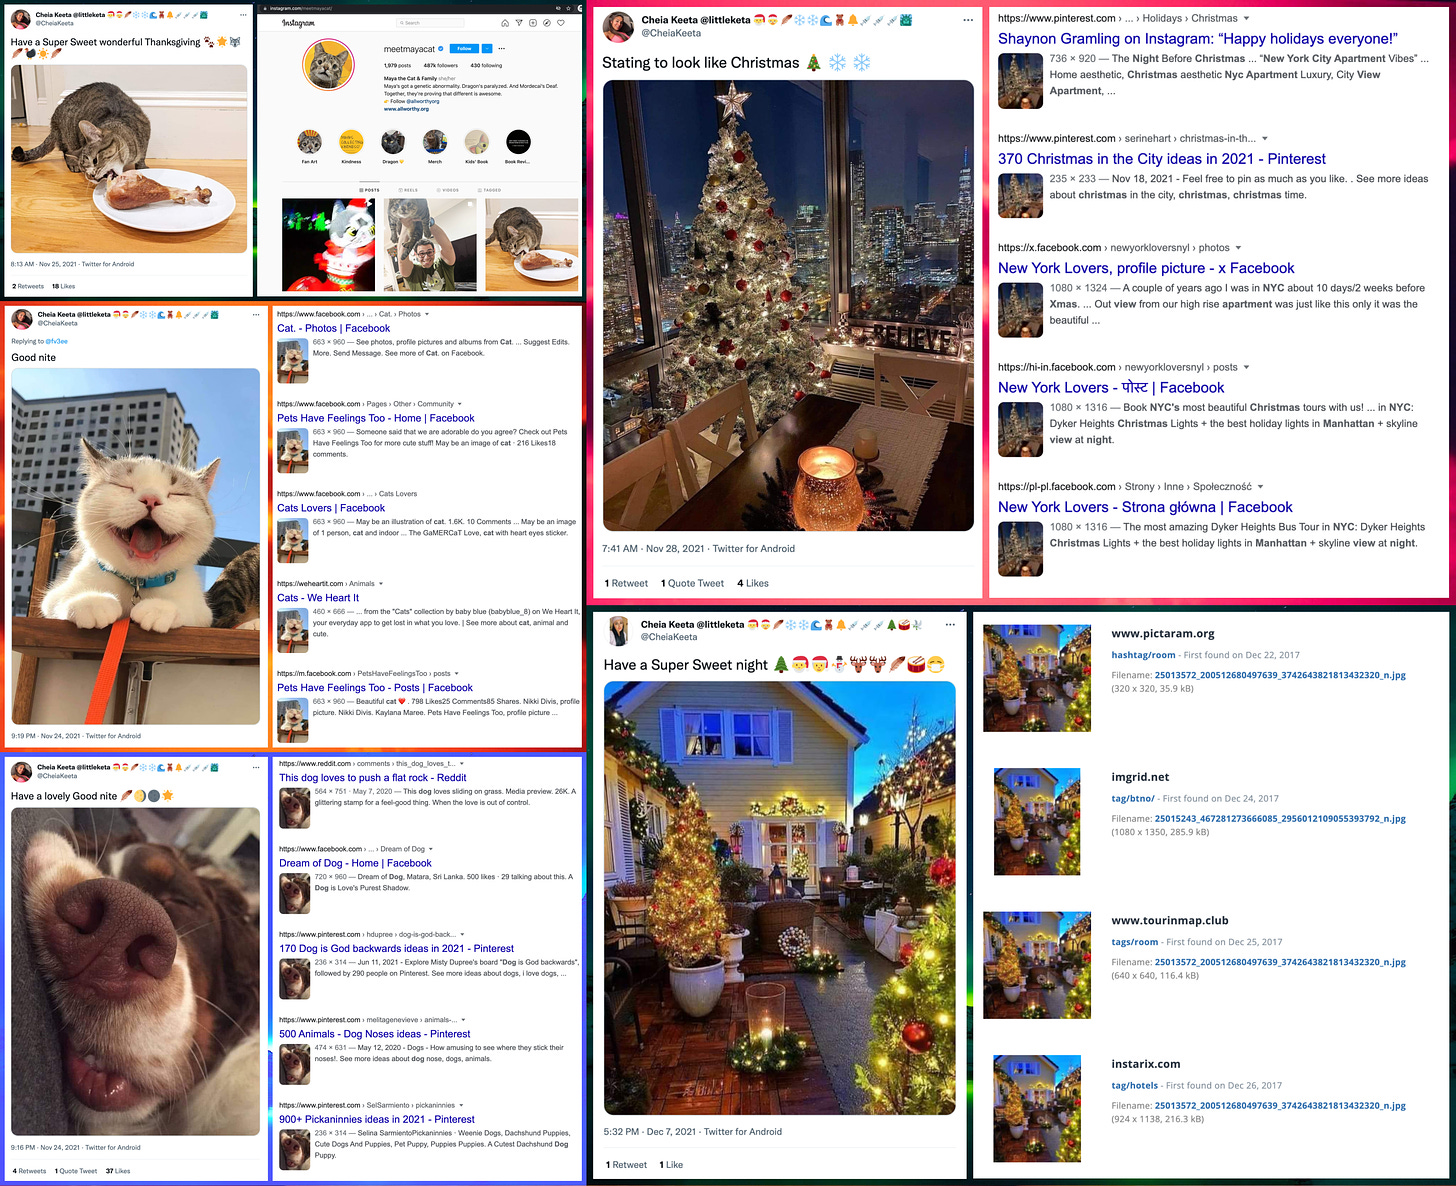 collage of photos allegedly depicting @CheiaKeeta's pets and Christmas tree, and reverse image searches showing that all the photos are plagiarized